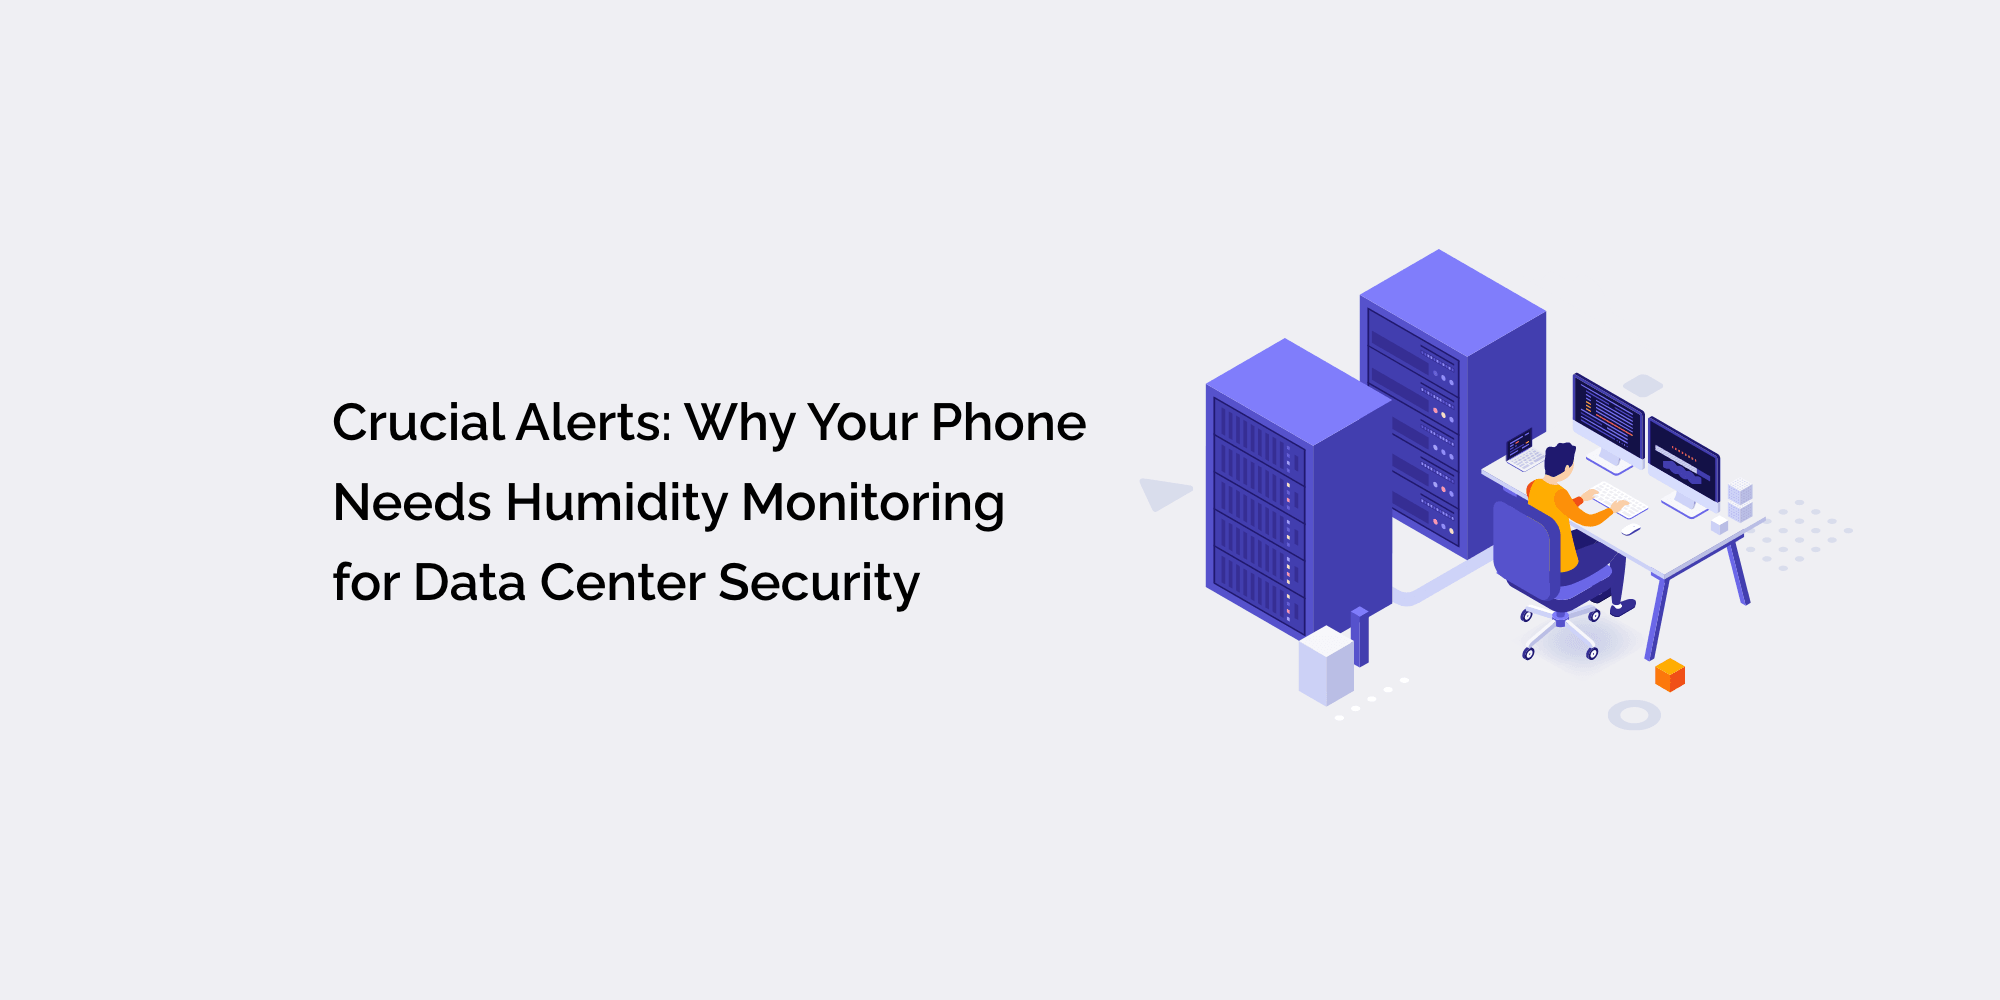 Crucial Alerts: Why Your Phone Needs Humidity Monitoring for Data Center Security